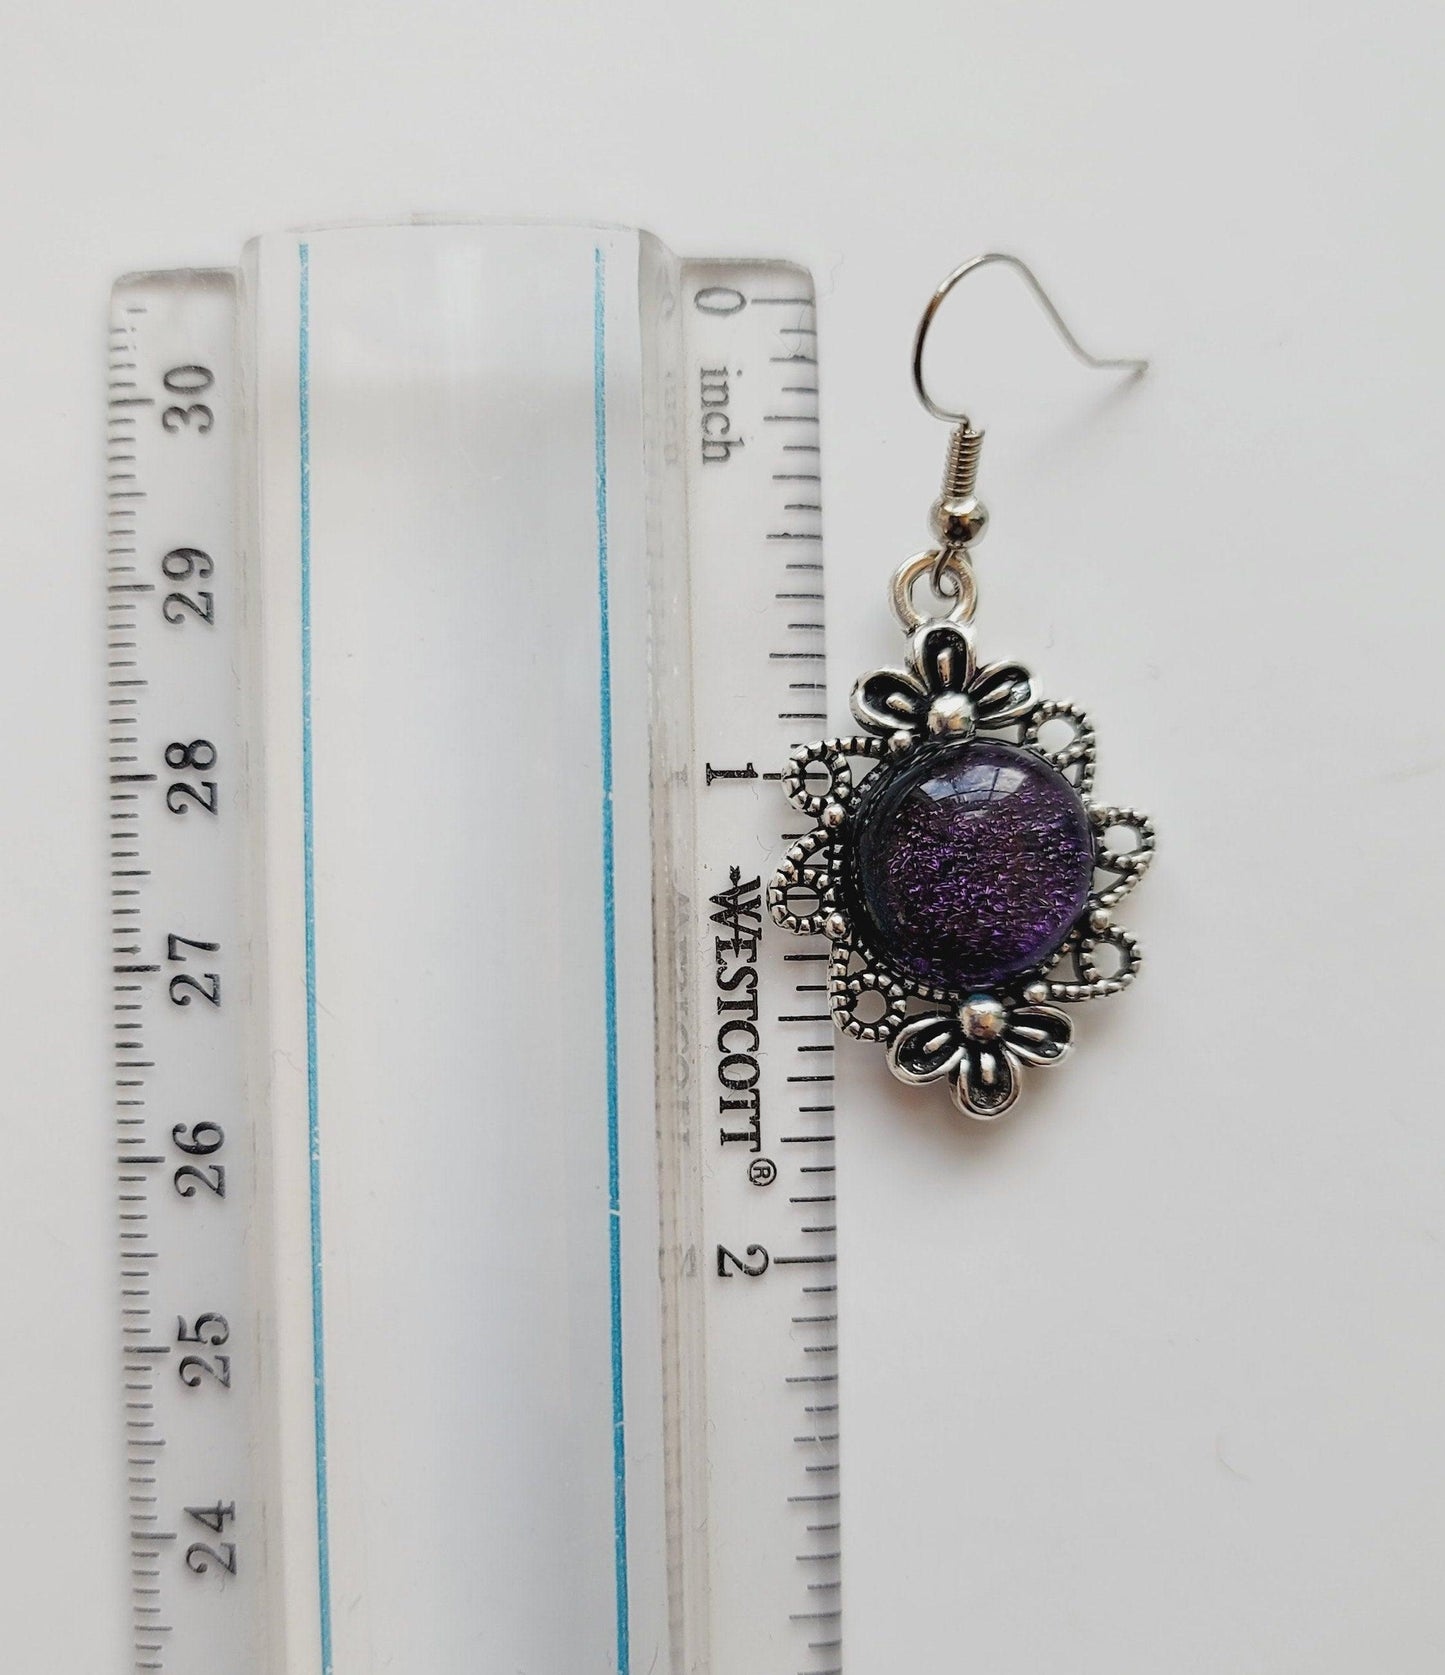 Silver tone flower earrings with color shifting purple dichroic fused glass cabo pierced seedsglassworks seeds glassworks